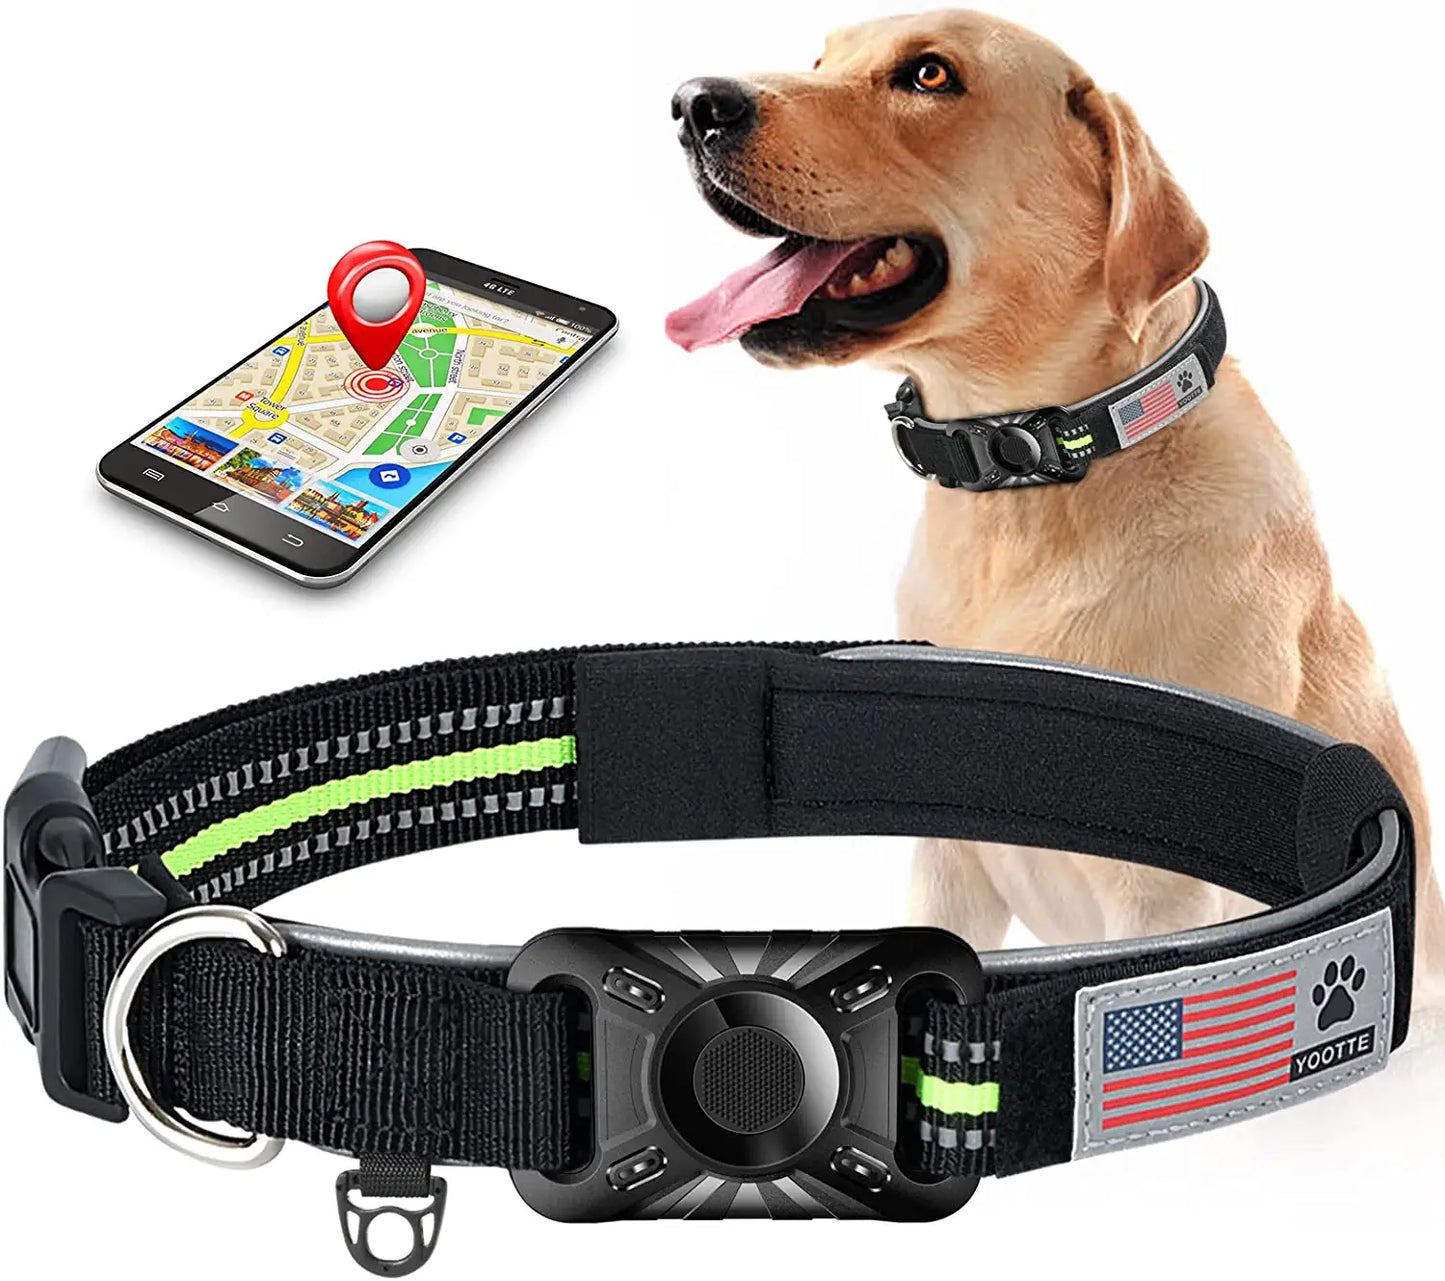 Reflective Airtag Dog Collar with Holder Case, Padded Breathable Dog Collar with Protective Waterproof Airtag Holder Case, Adjustable Nylon Pet Collar GPS Dog Collar for Medium and Large Dogs